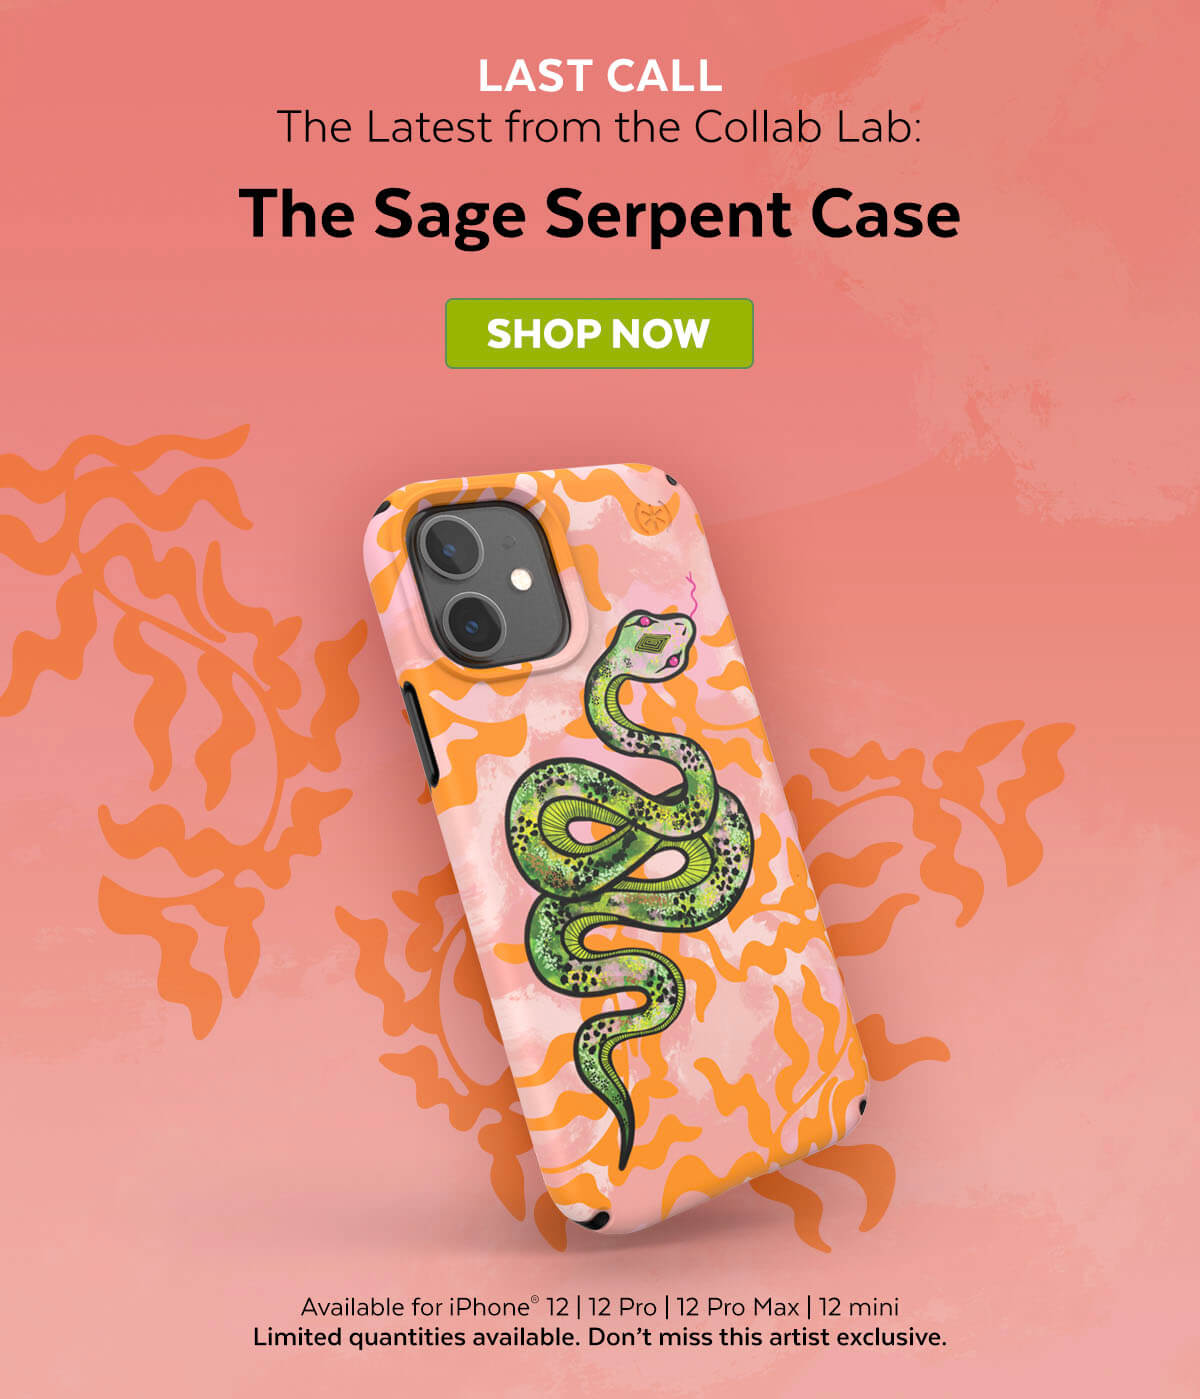 Introducing the latest from the Collab Lab: The Sage Serpent Case. Shop now.